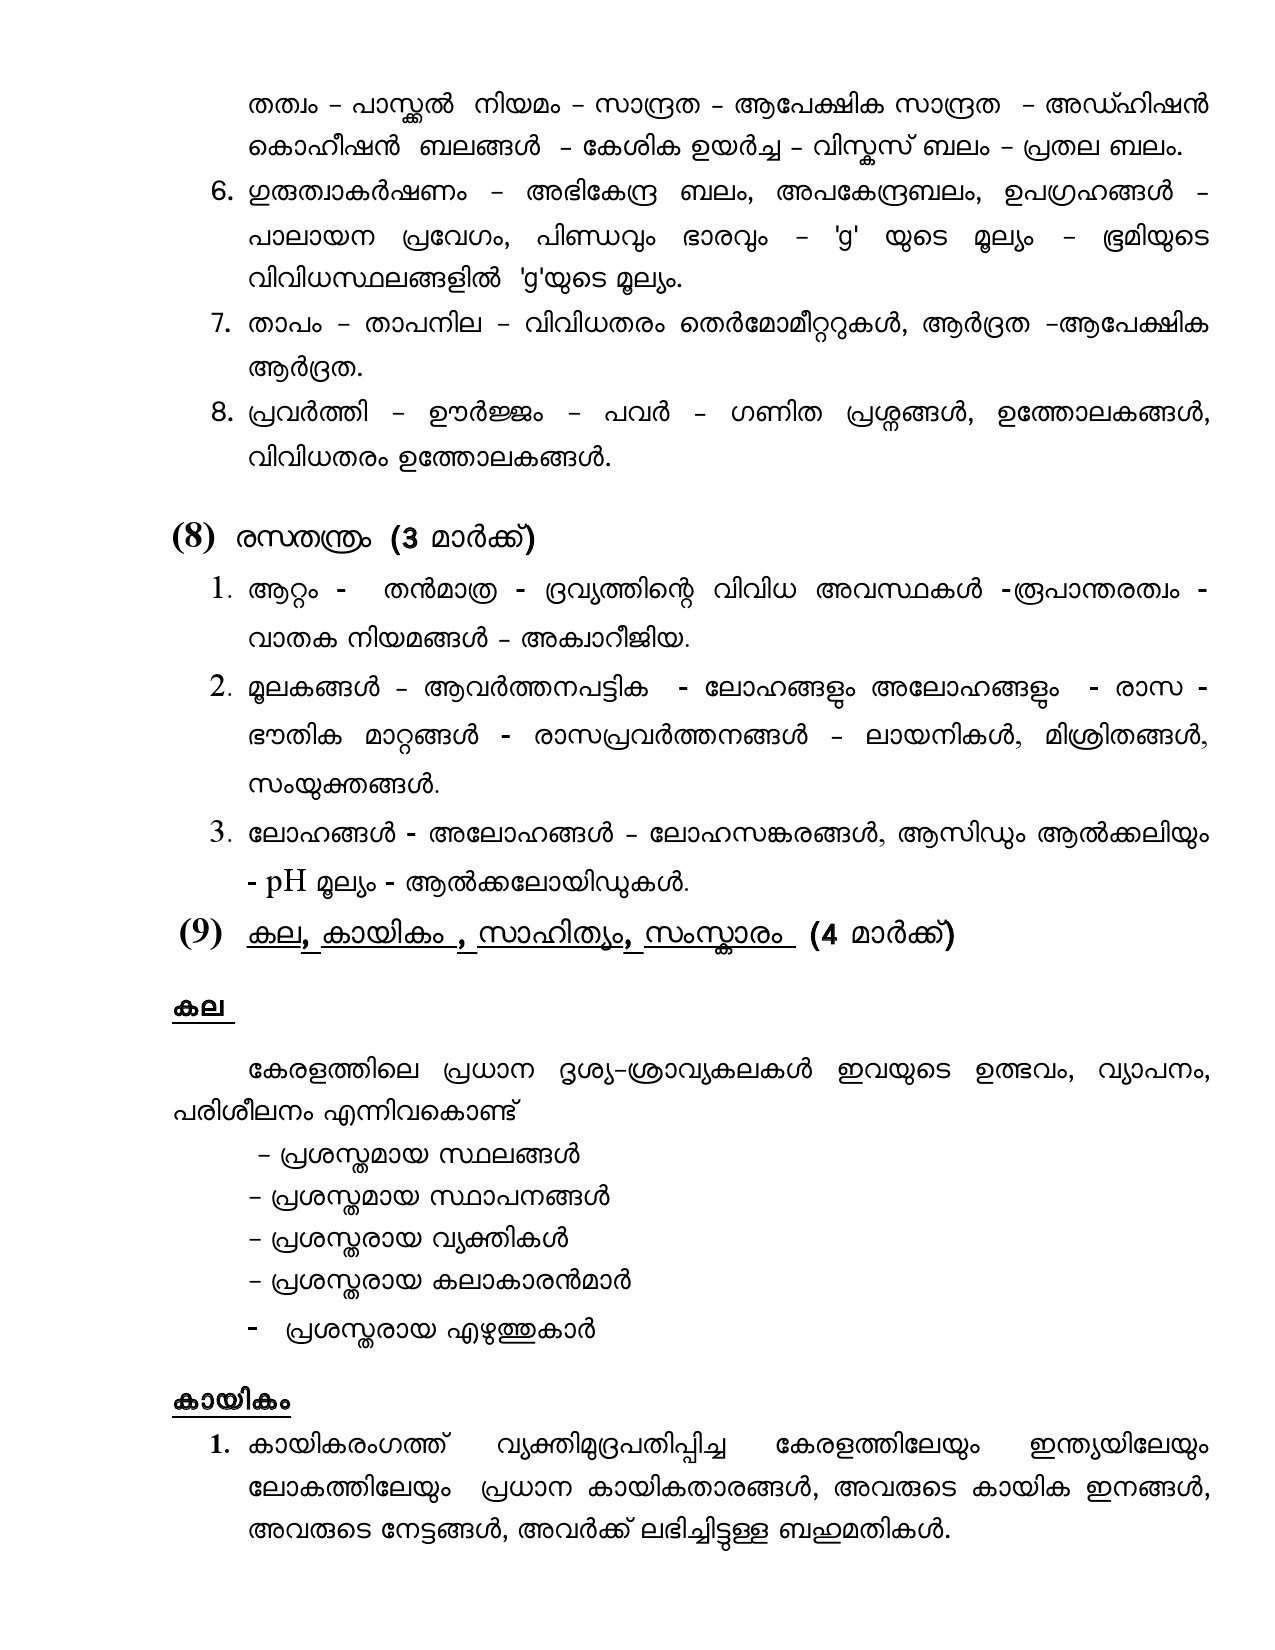 Syllabus For 2023 OMR Examination Of Civil Police Officer - Notification Image 5